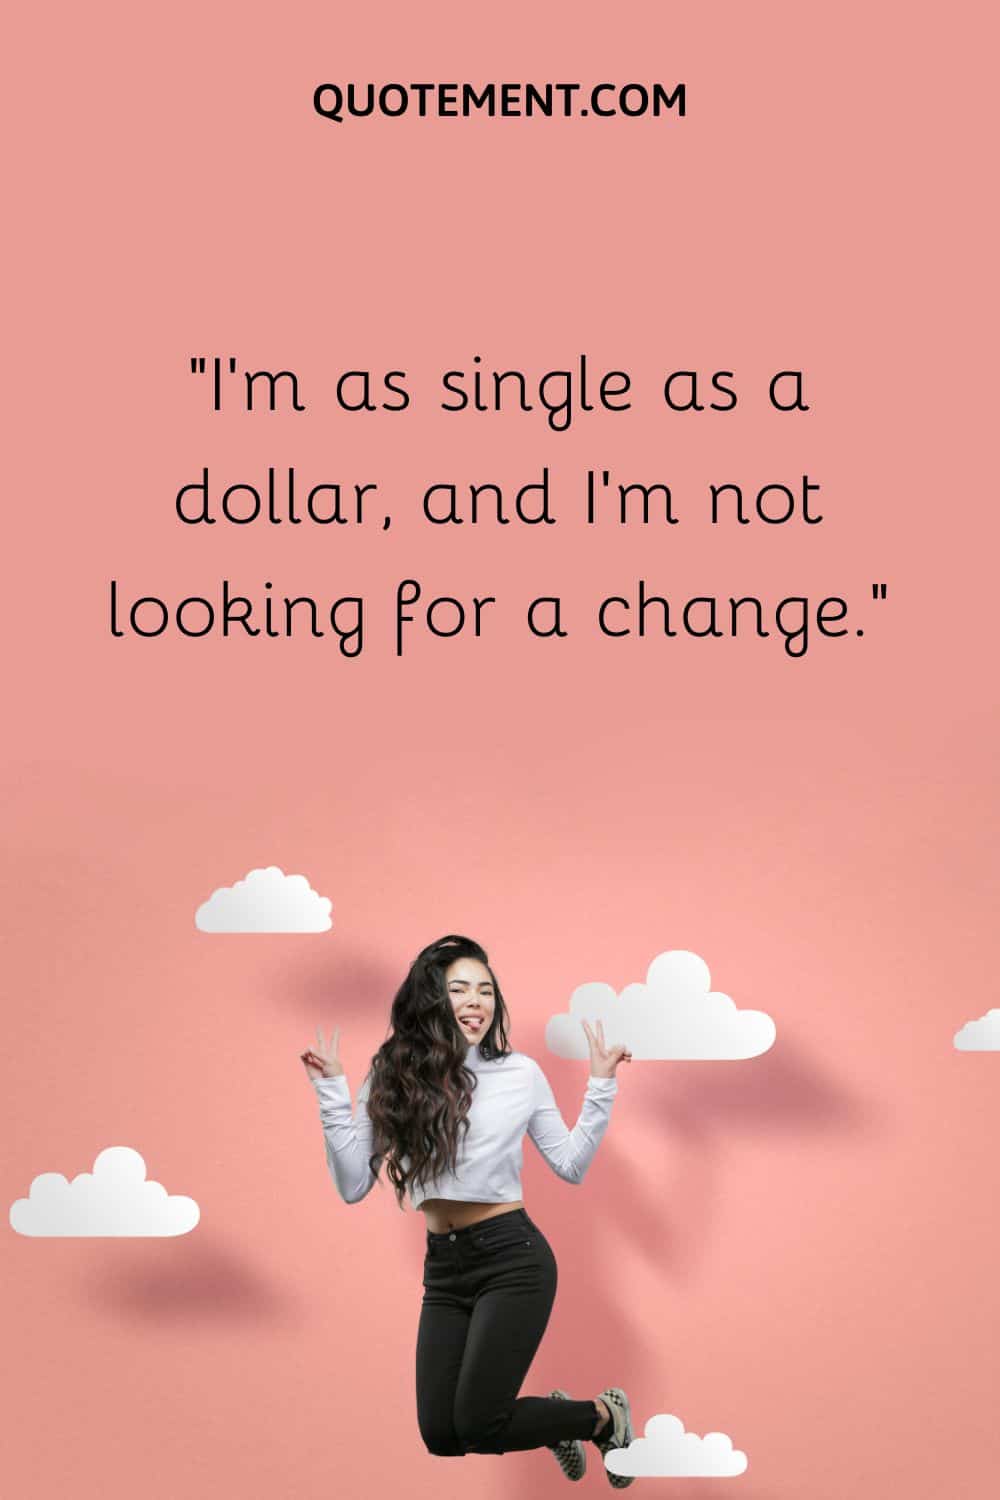 I’m as single as a dollar, and I’m not looking for a change